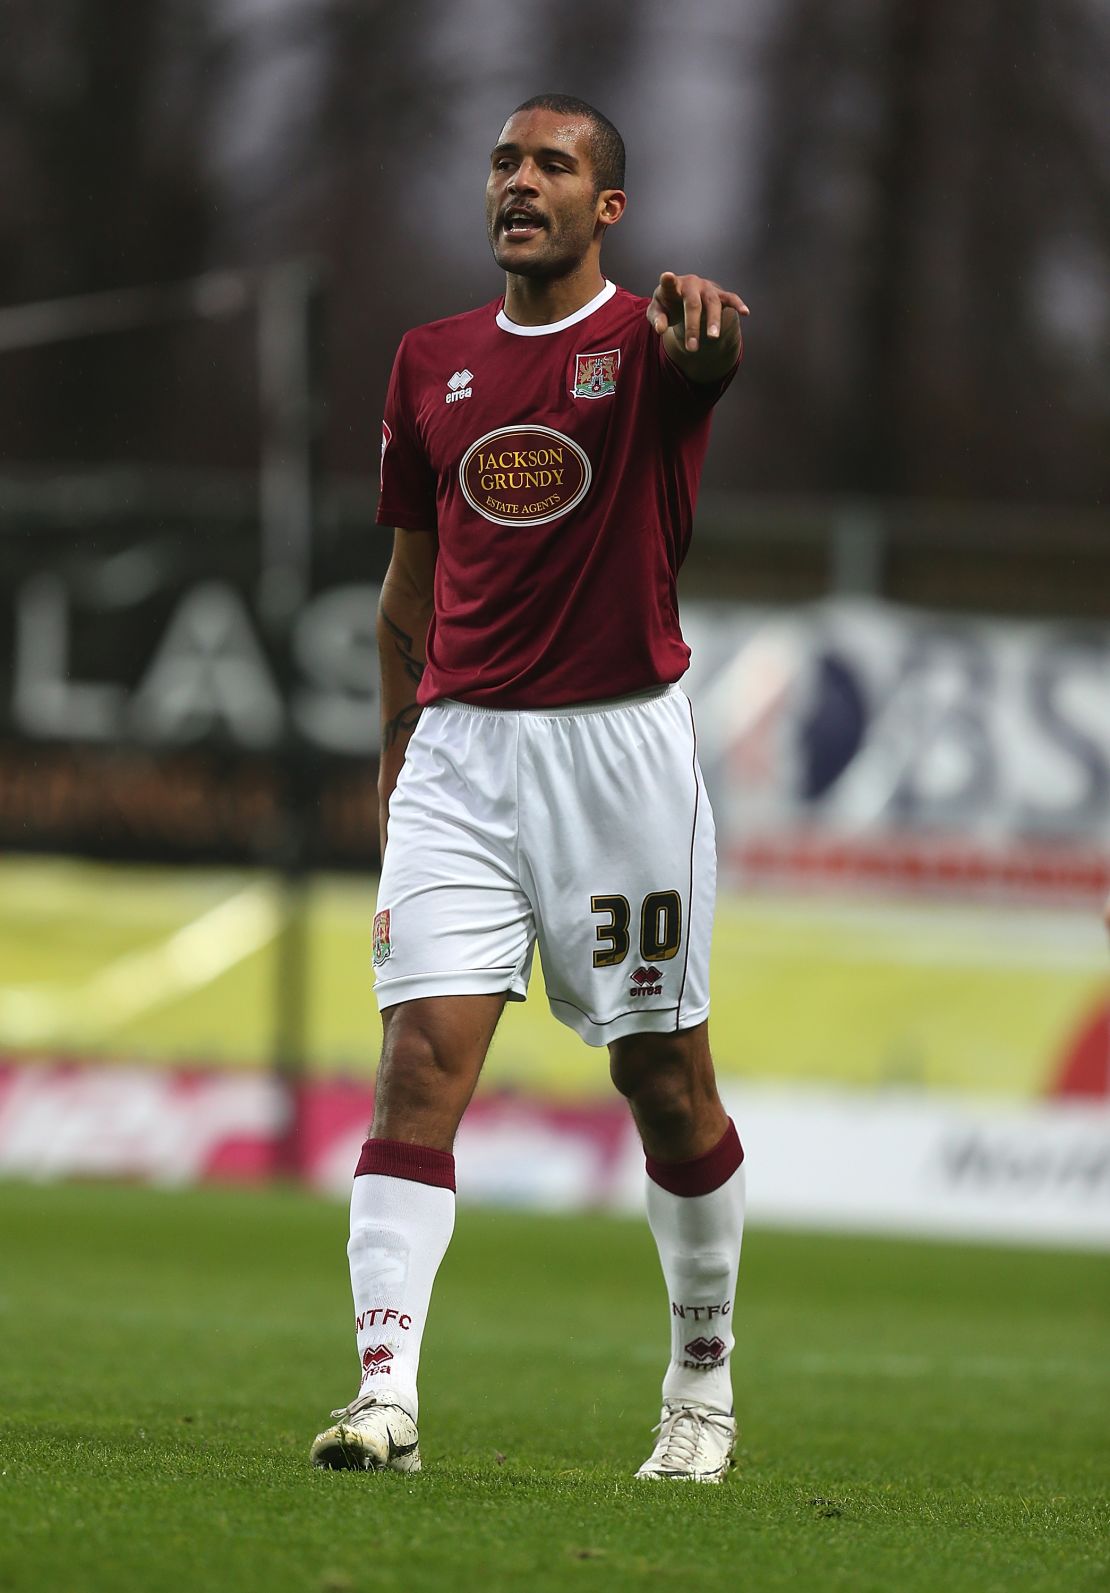 Clarke Carlisle in action playing for Northampton Town in 2012.